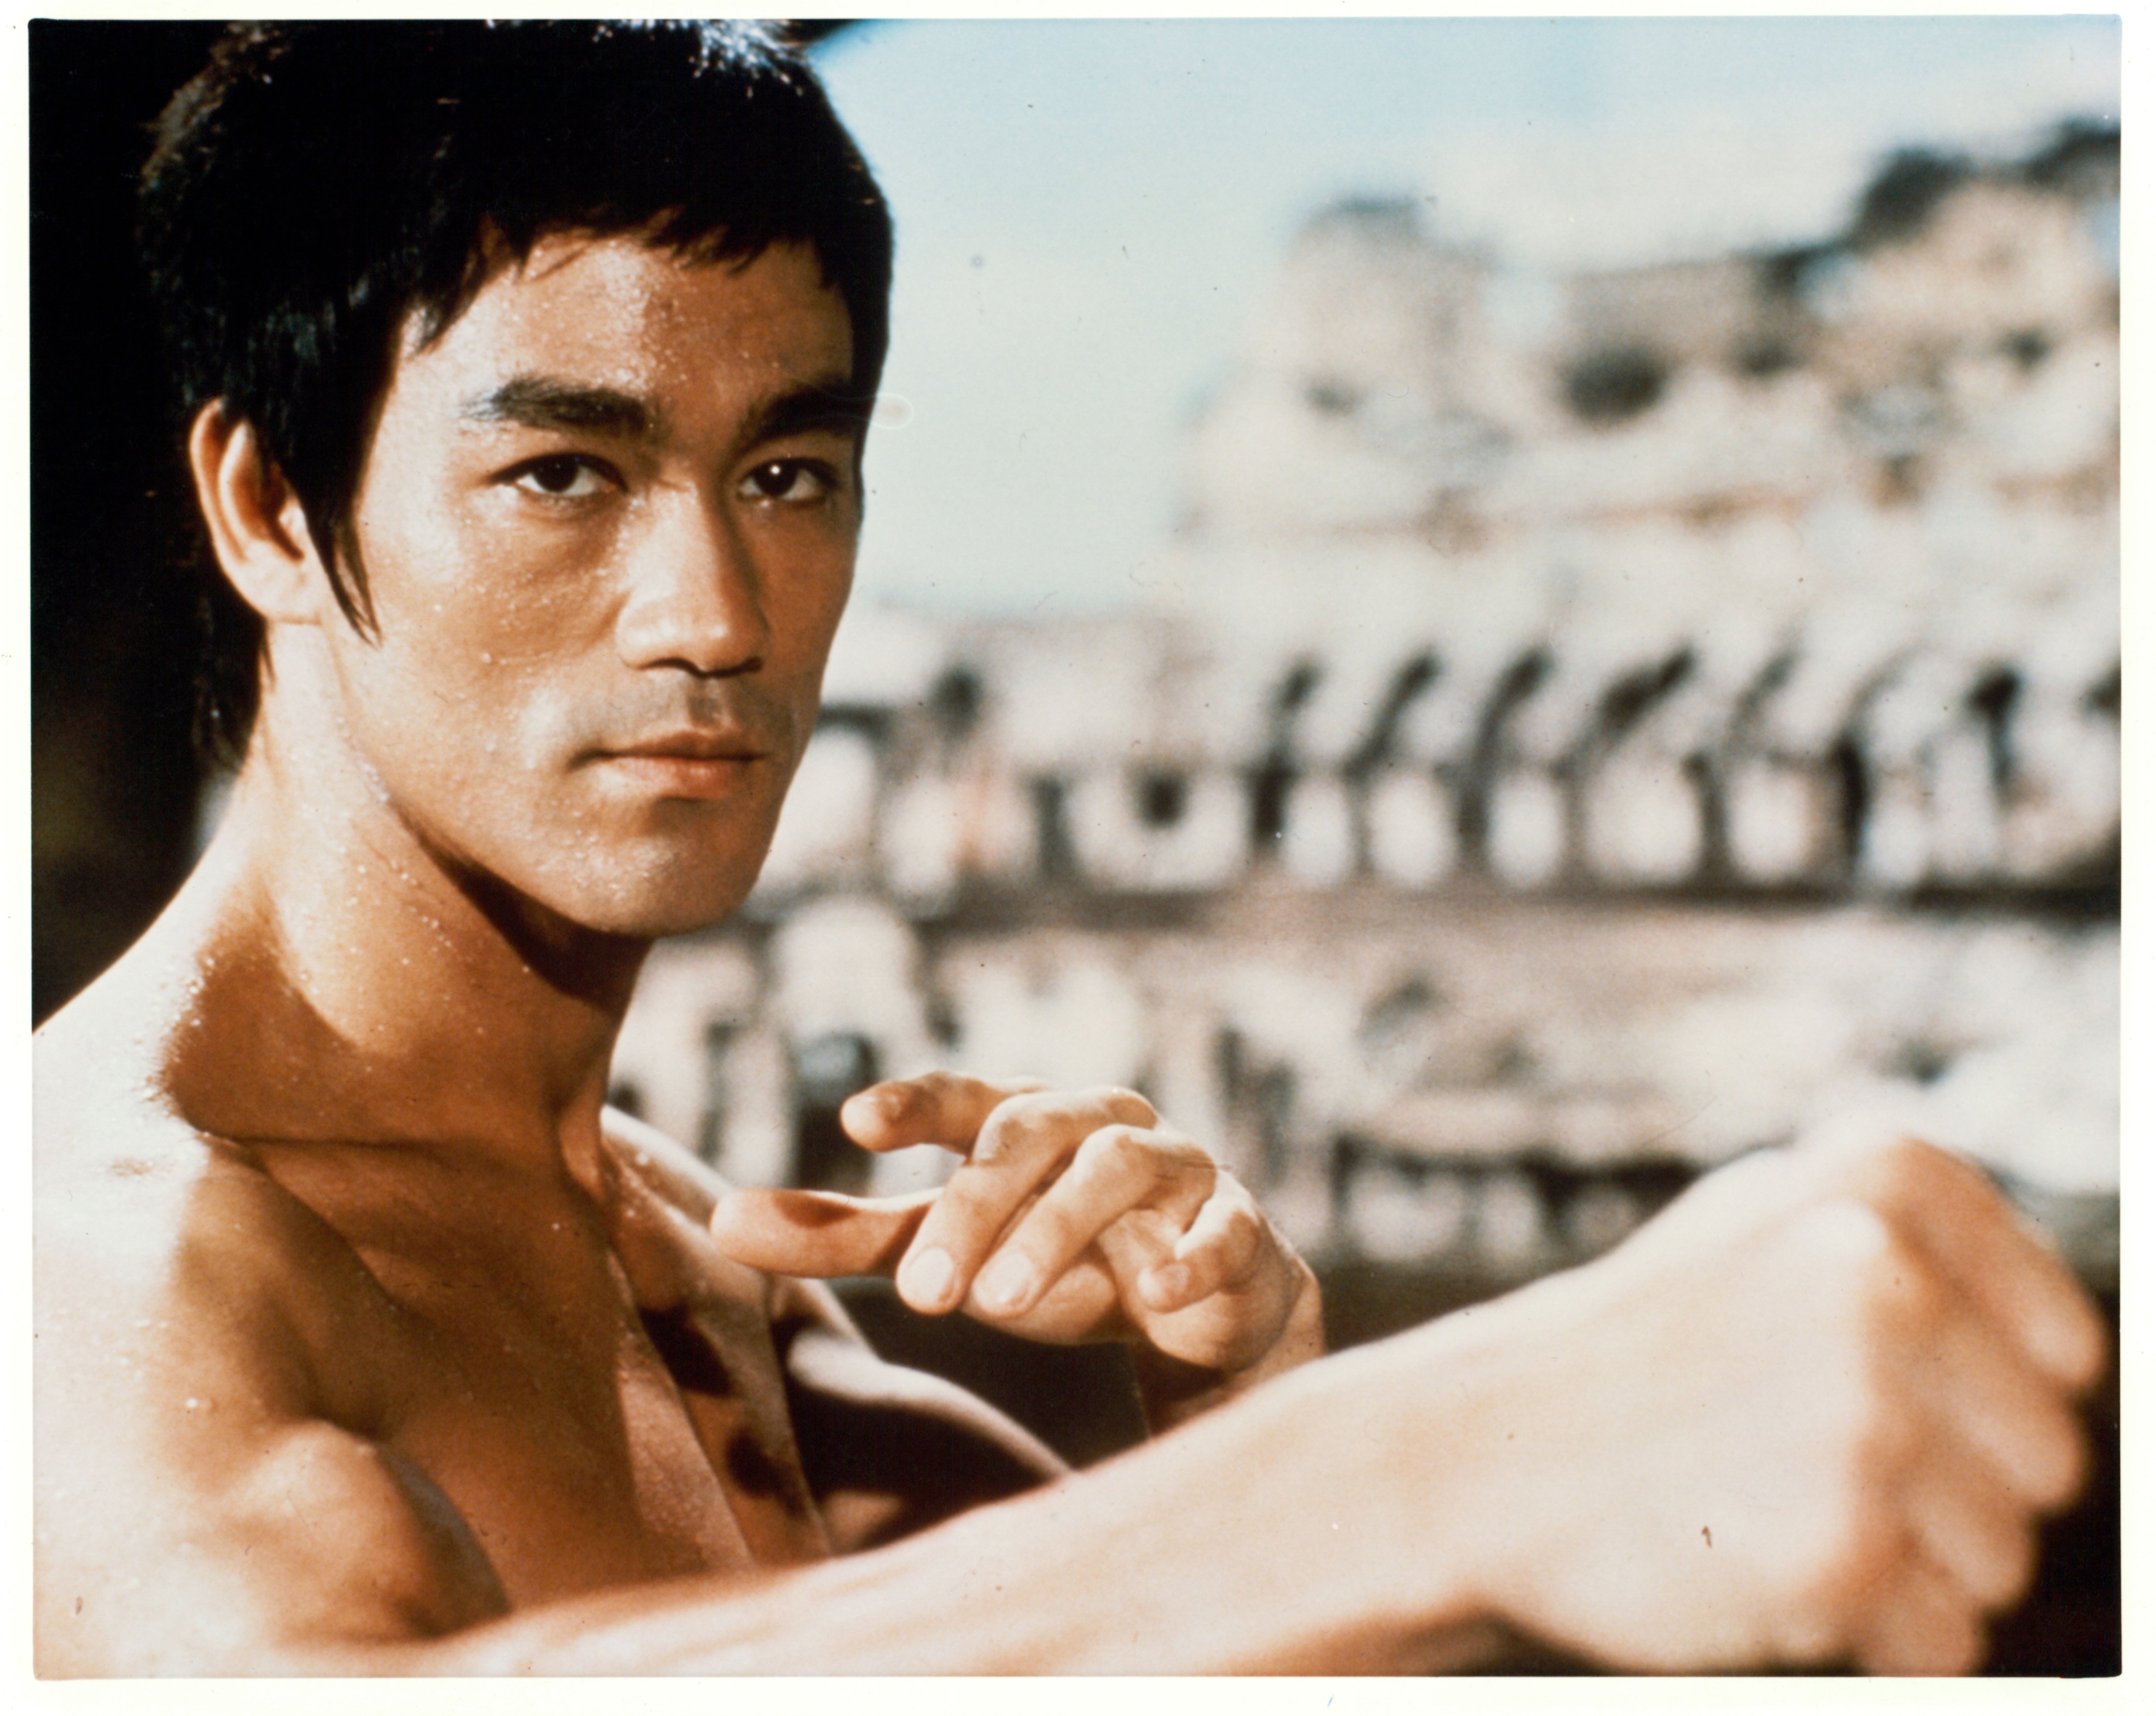 Bruce Lee  during the Colosseum scene from the film "The Way of the Dragon" in 1972 in Rome, Italy | Photo: Warner Brothers/Getty Images